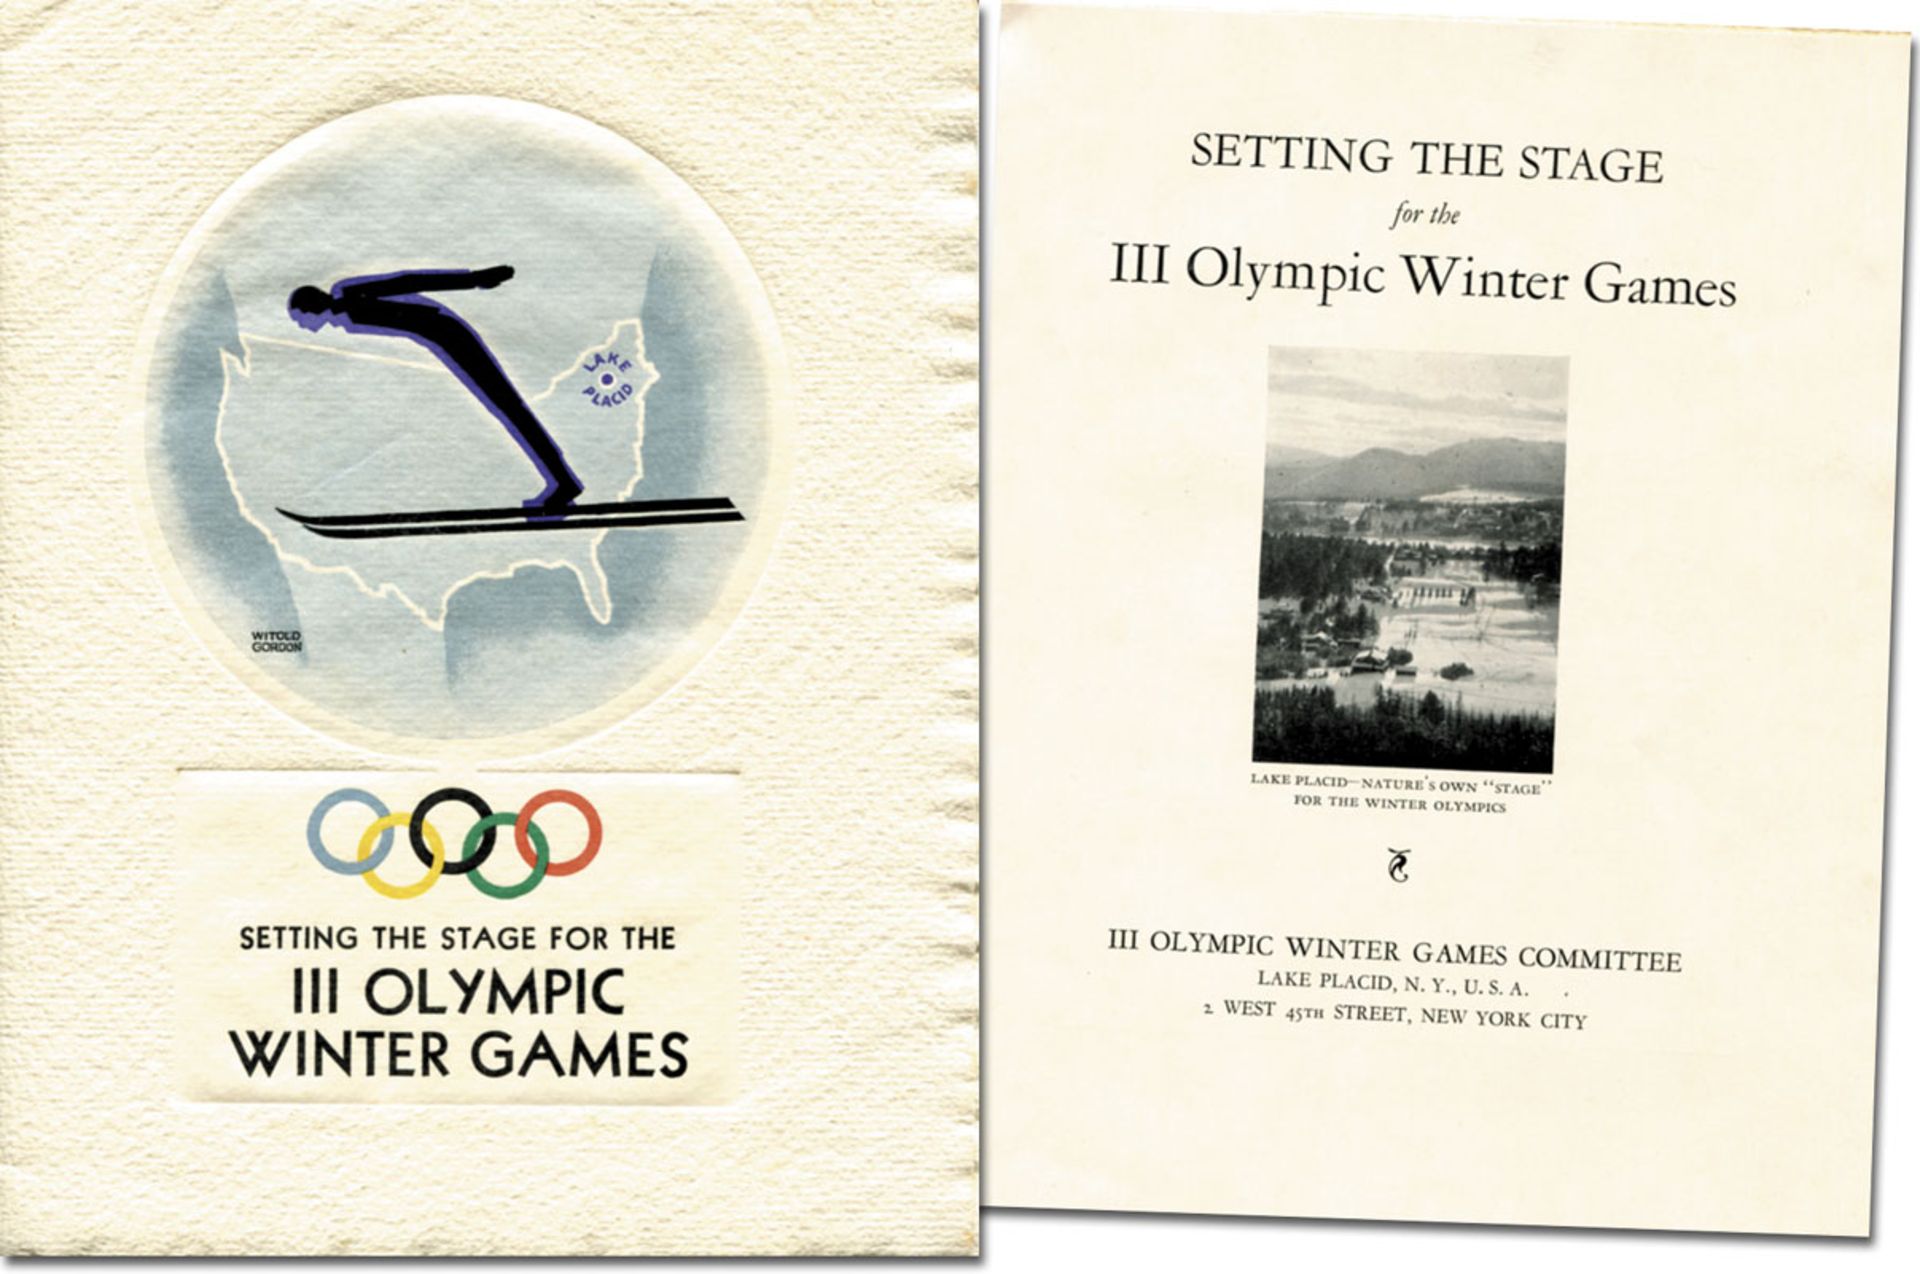 Bulletin OSW 1932 - Setting the Stage for the III Olympic Winter Games. - Offizielles Bulletin über 